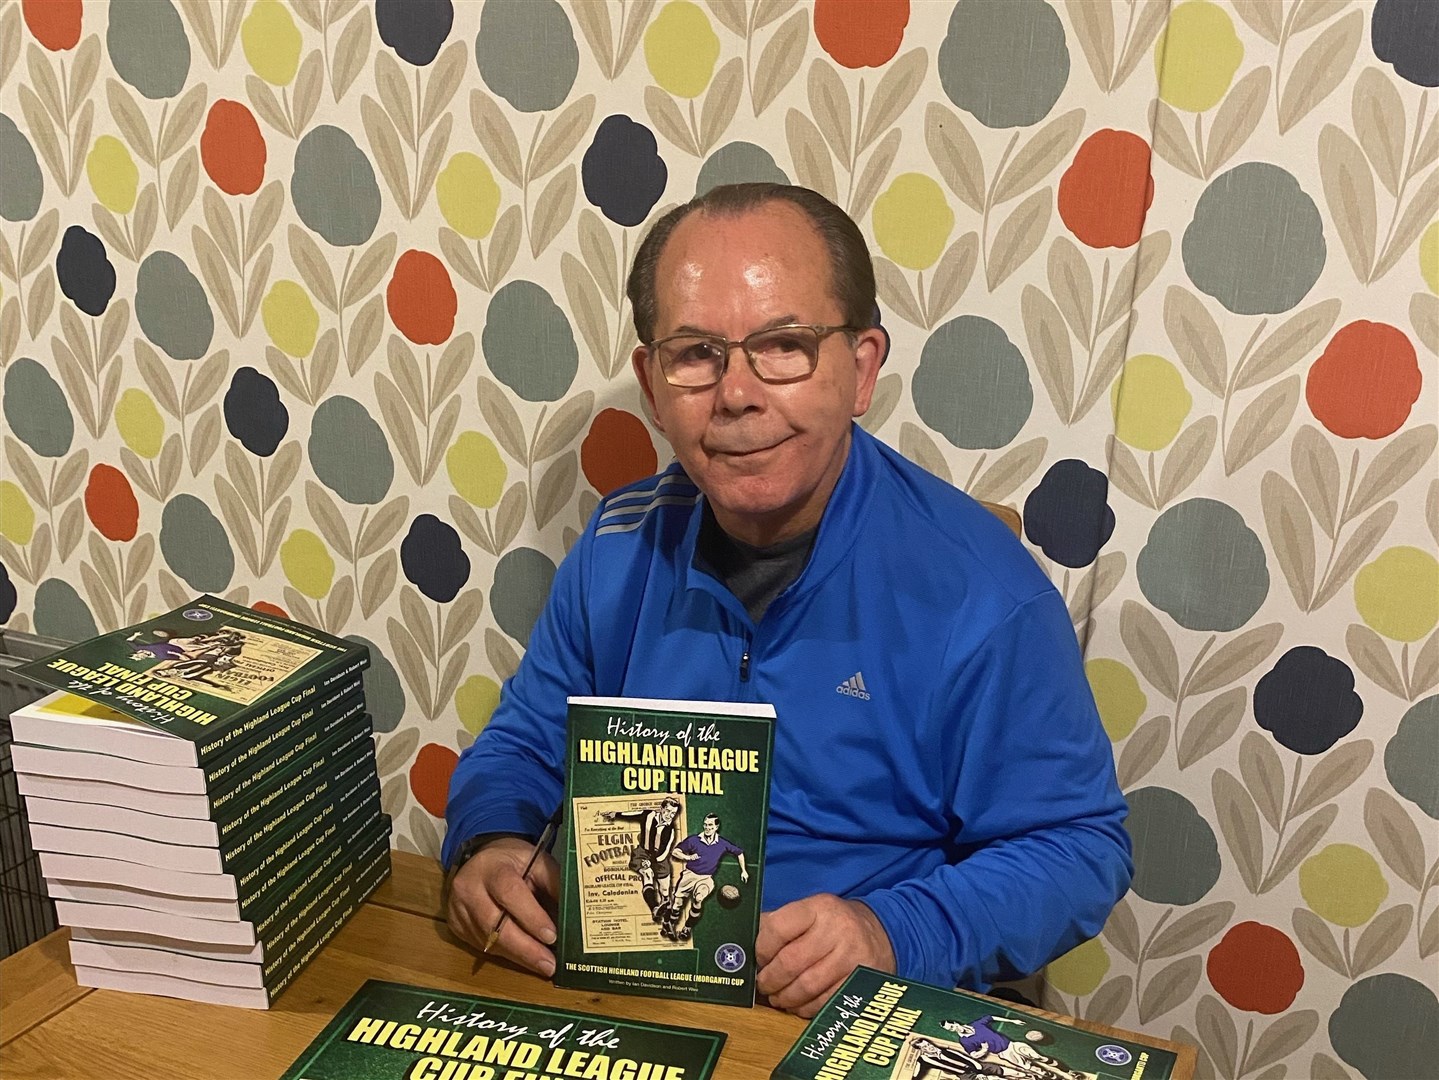 Co-author of "The History of the Highland League Cup Final", Ian Davidson hopes that the new publication will bring back fond memories for supporters and players alike.